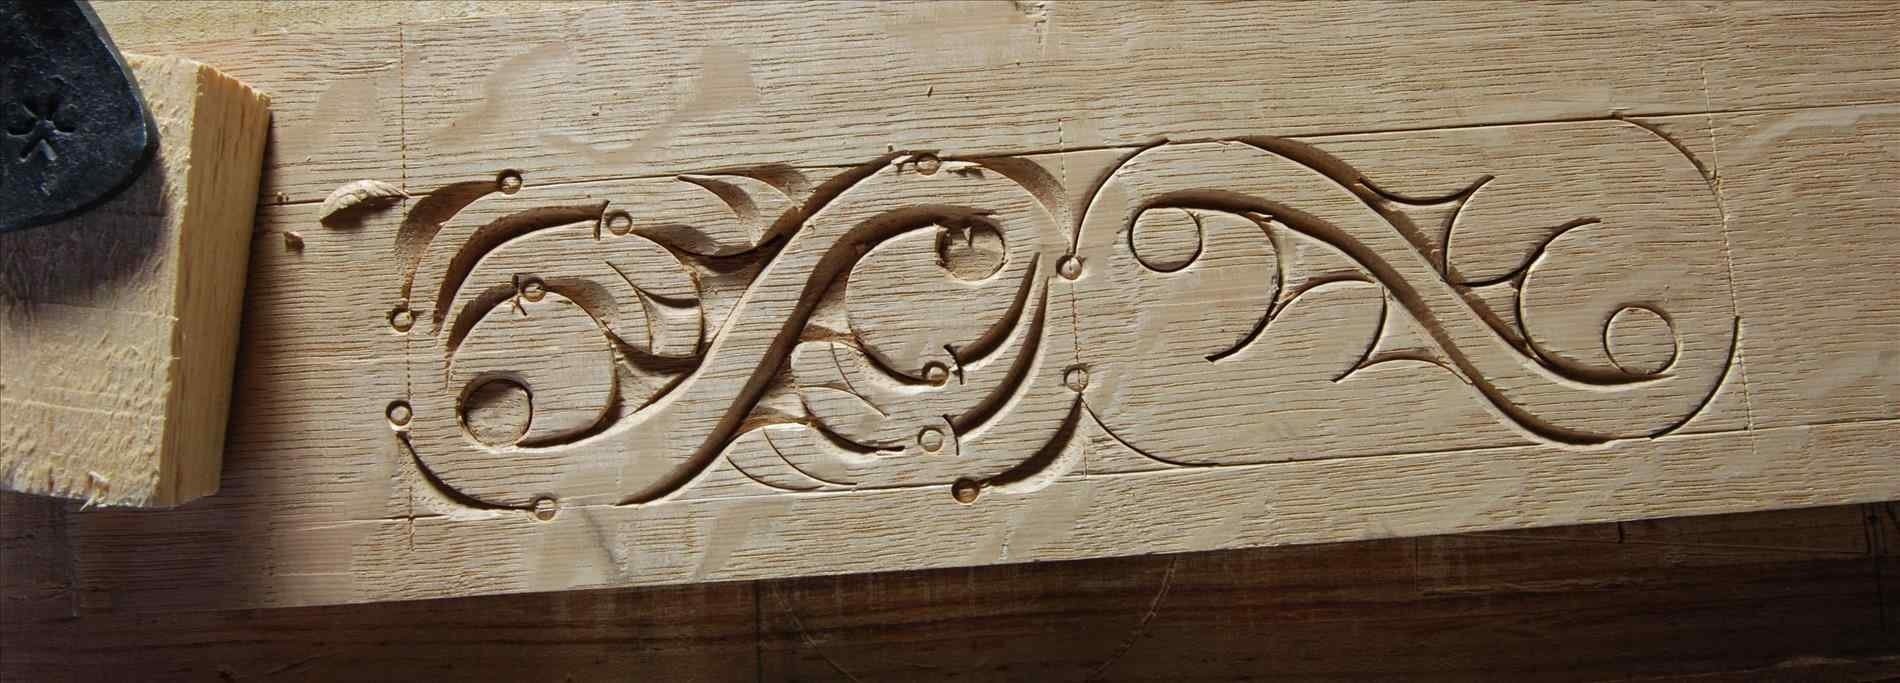 10 Beautiful Wood Carving Ideas For Beginners the images collection of notes tools licoricegrcom working tools 2022